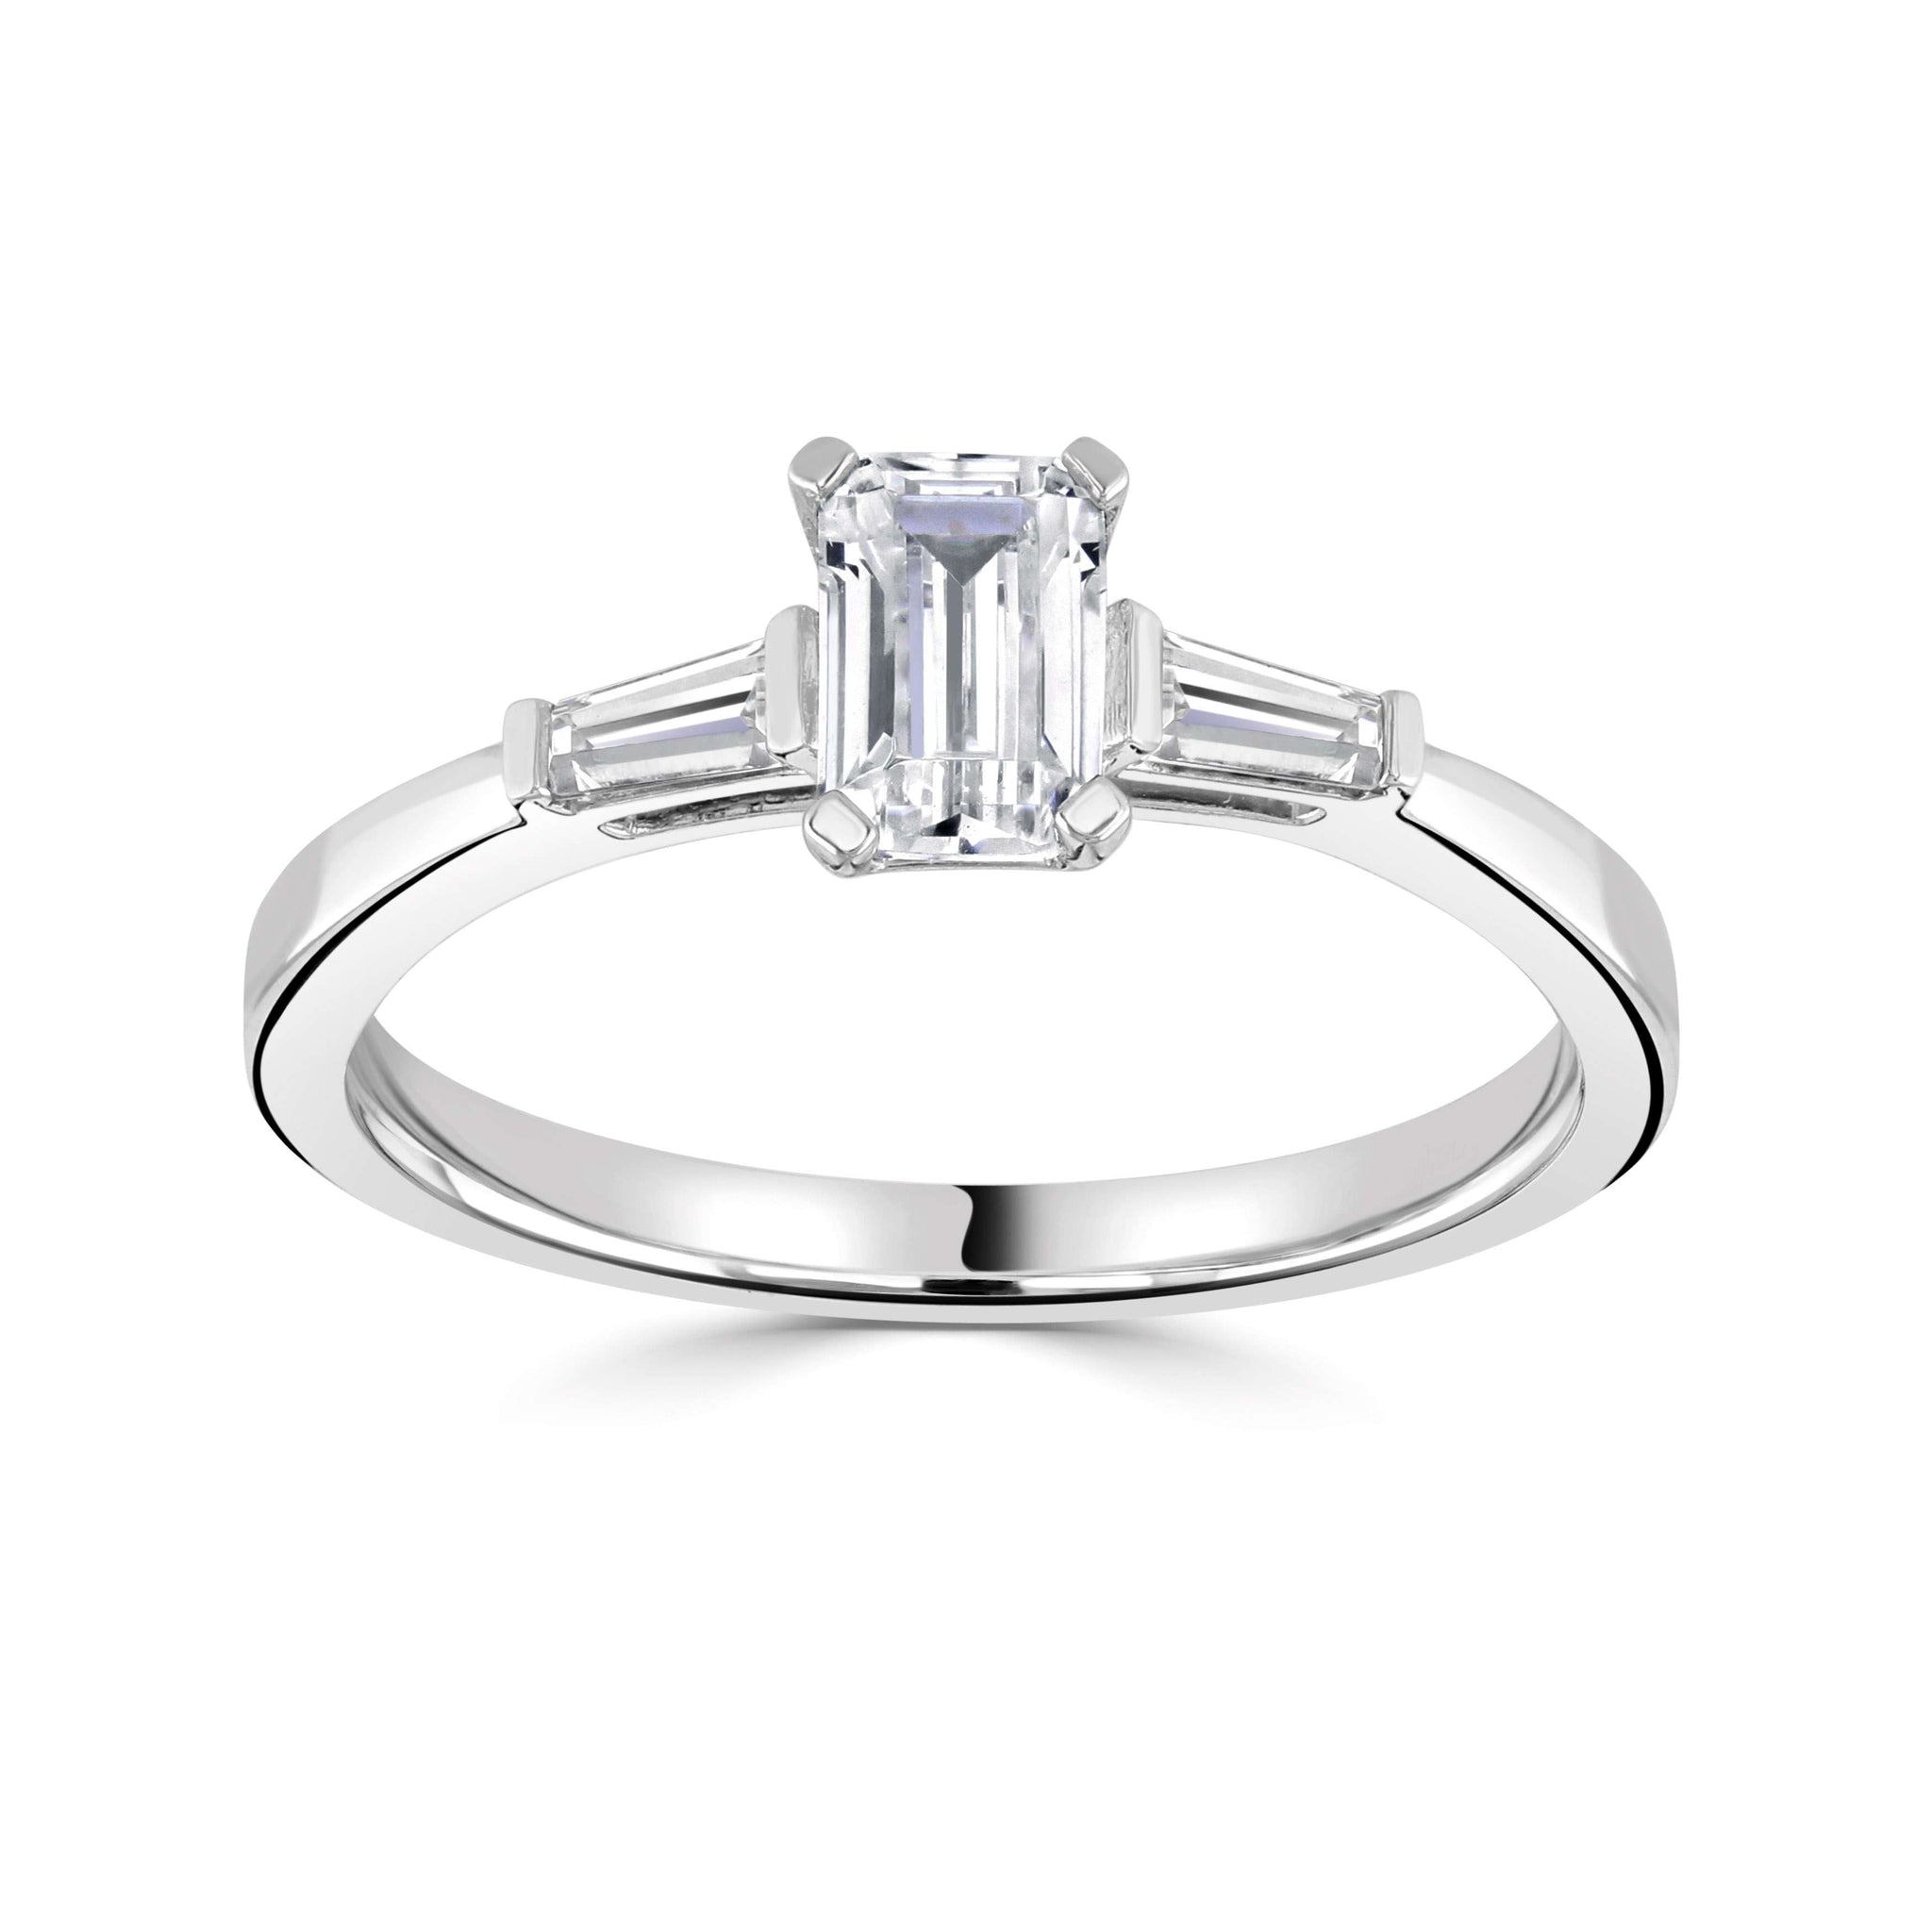 Millie *Select Emerald Cut Diamond 0.40ct or above